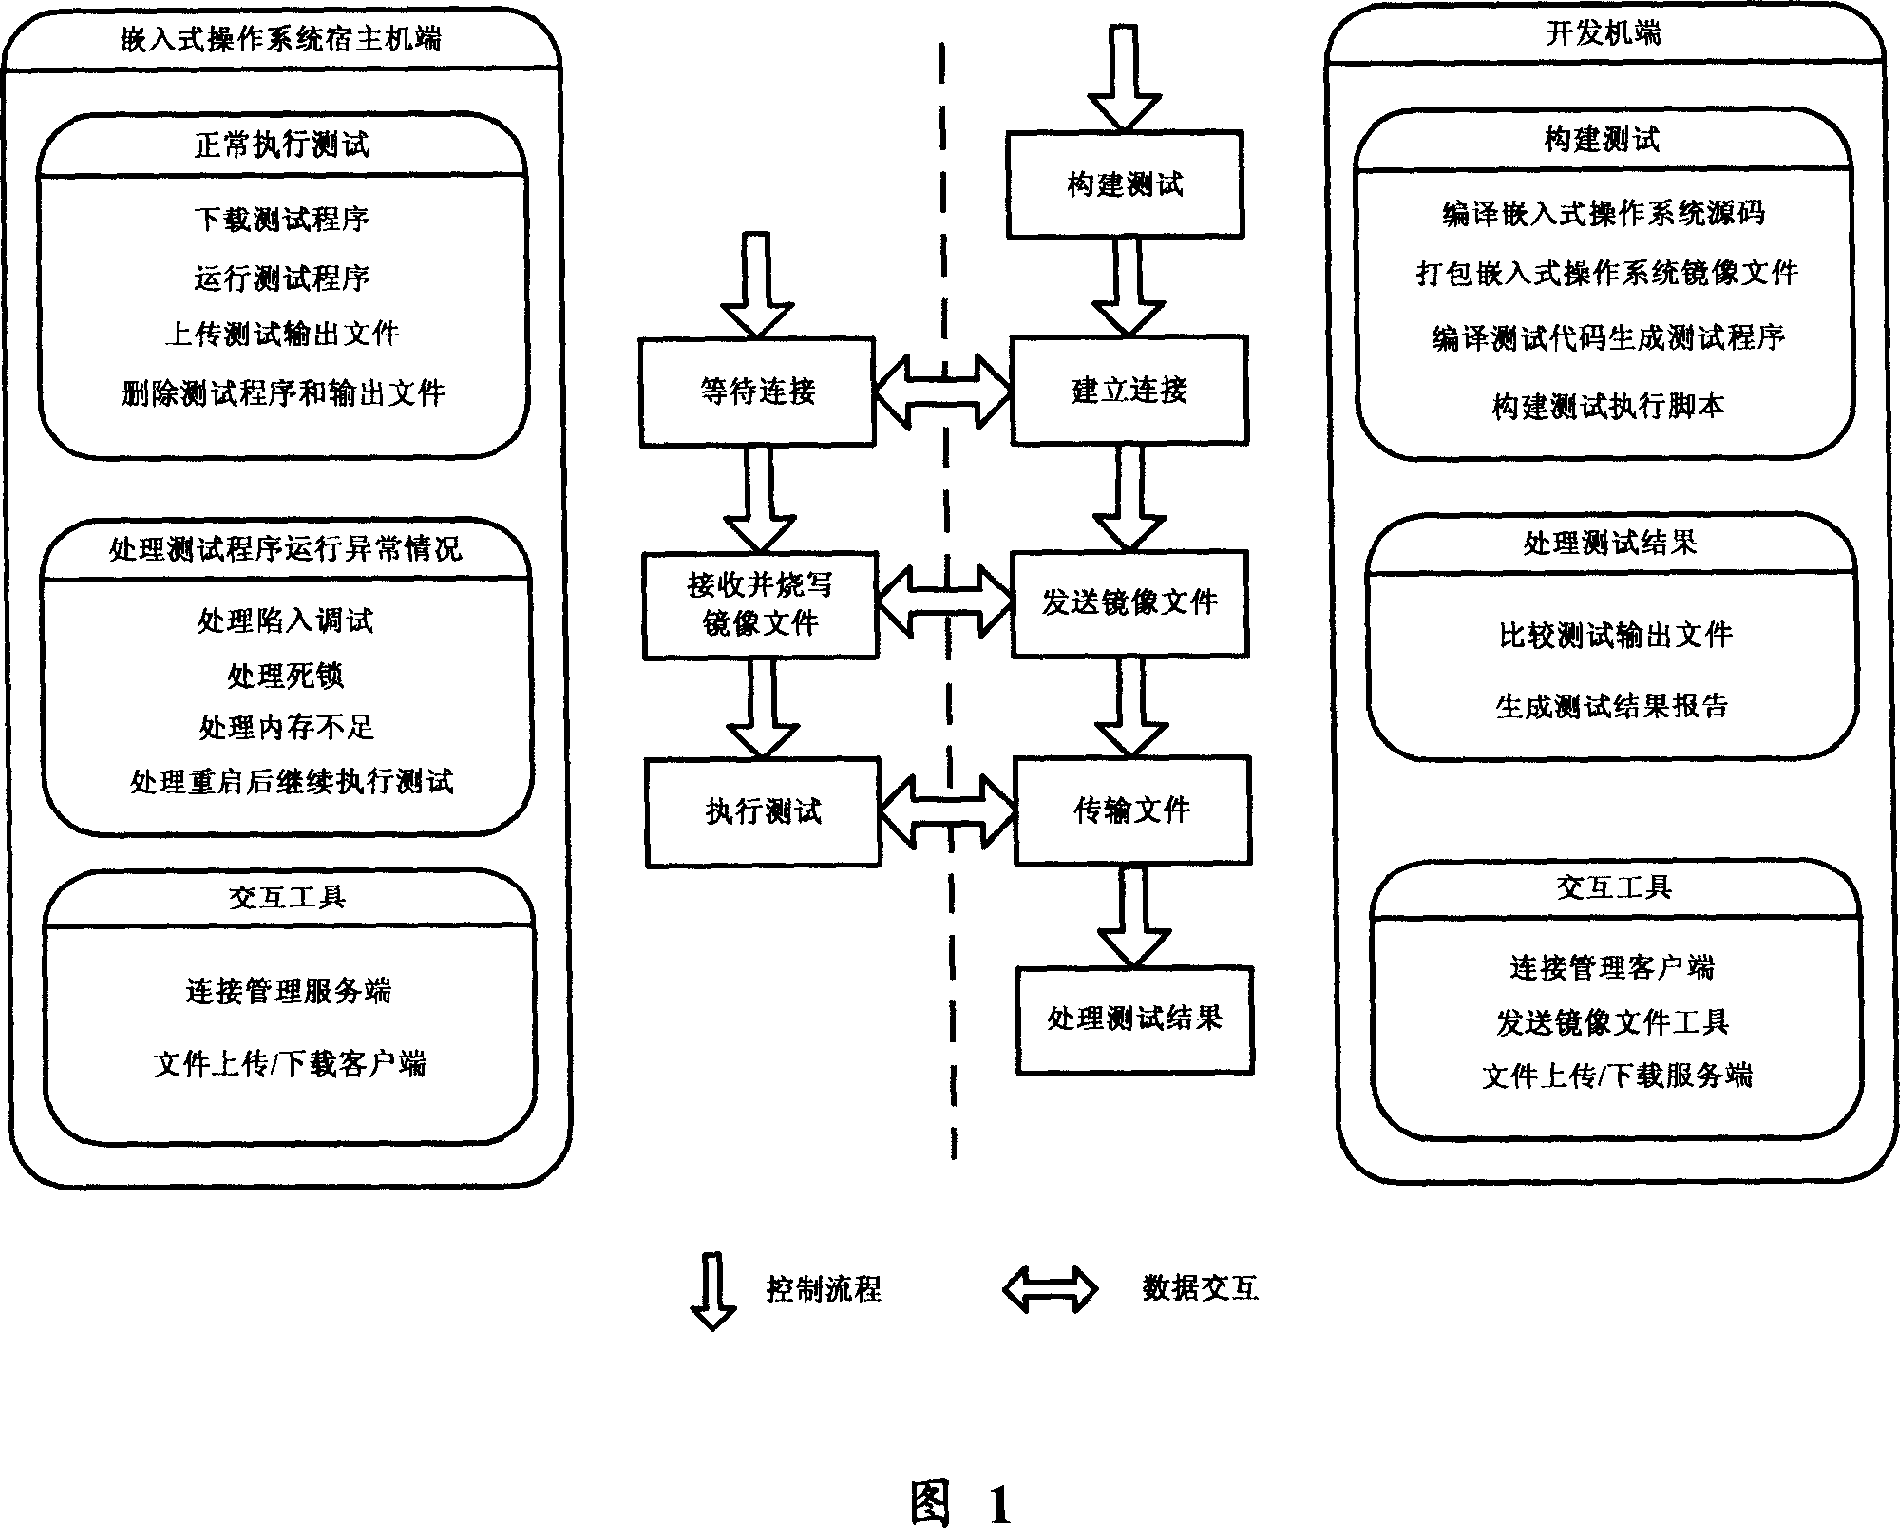 Automatic operating method for interface test in embedded operating system